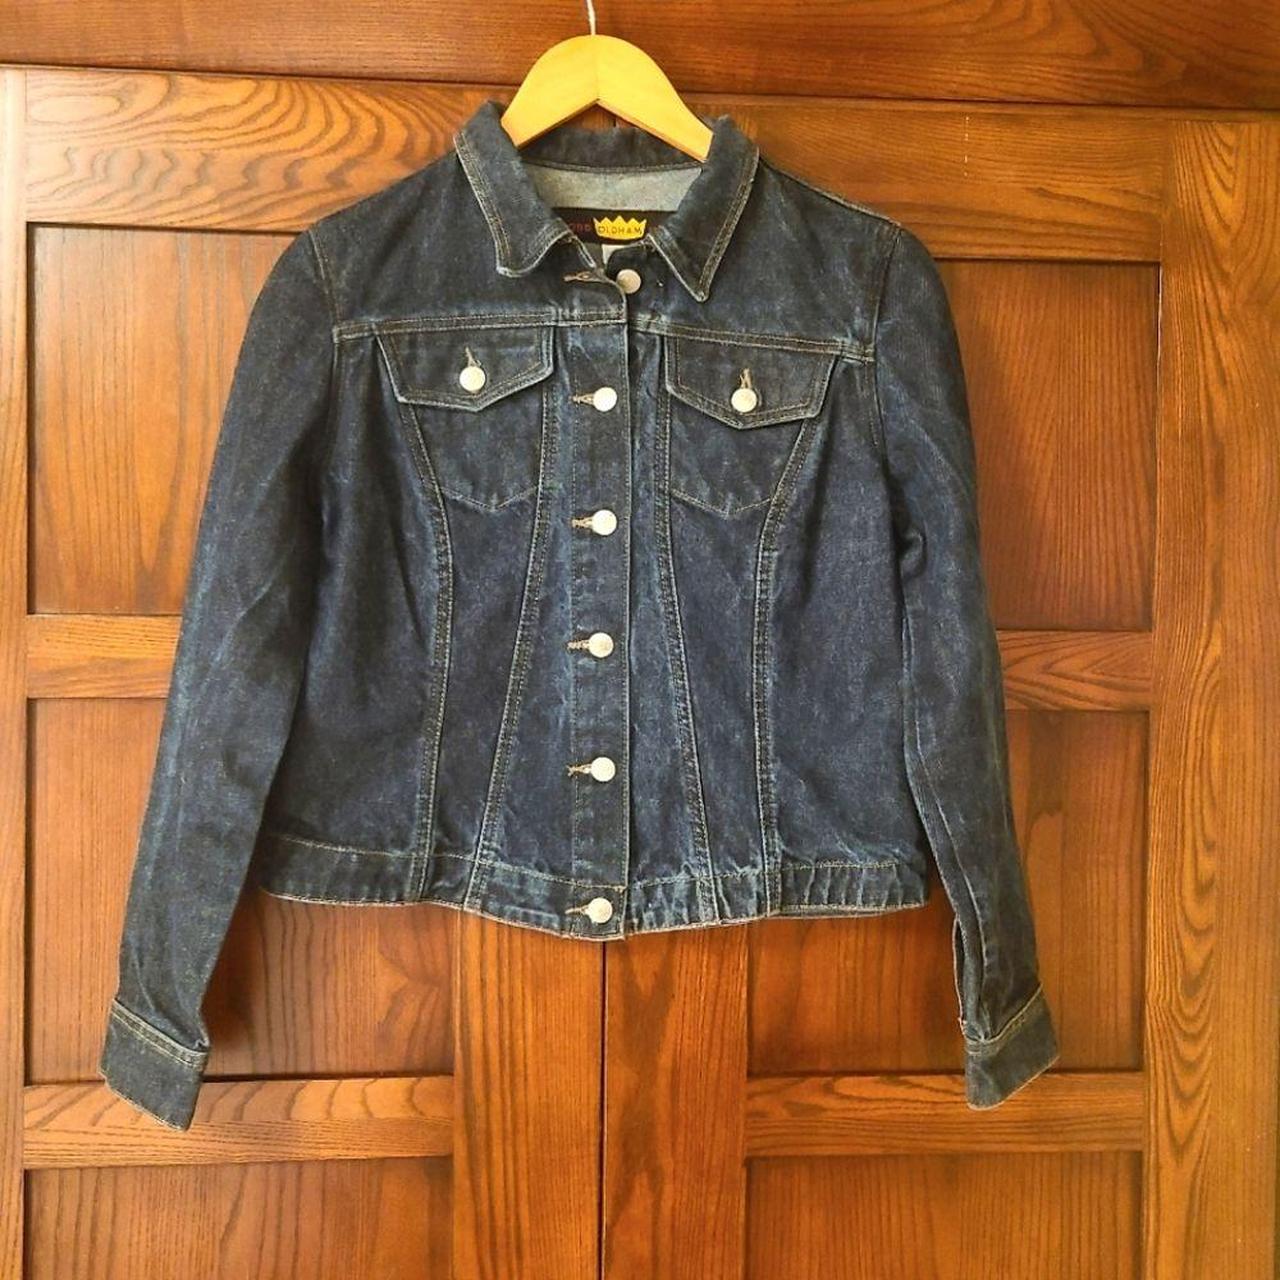 Vintage Denim Jacket from Todd Oldham. Late 90s...